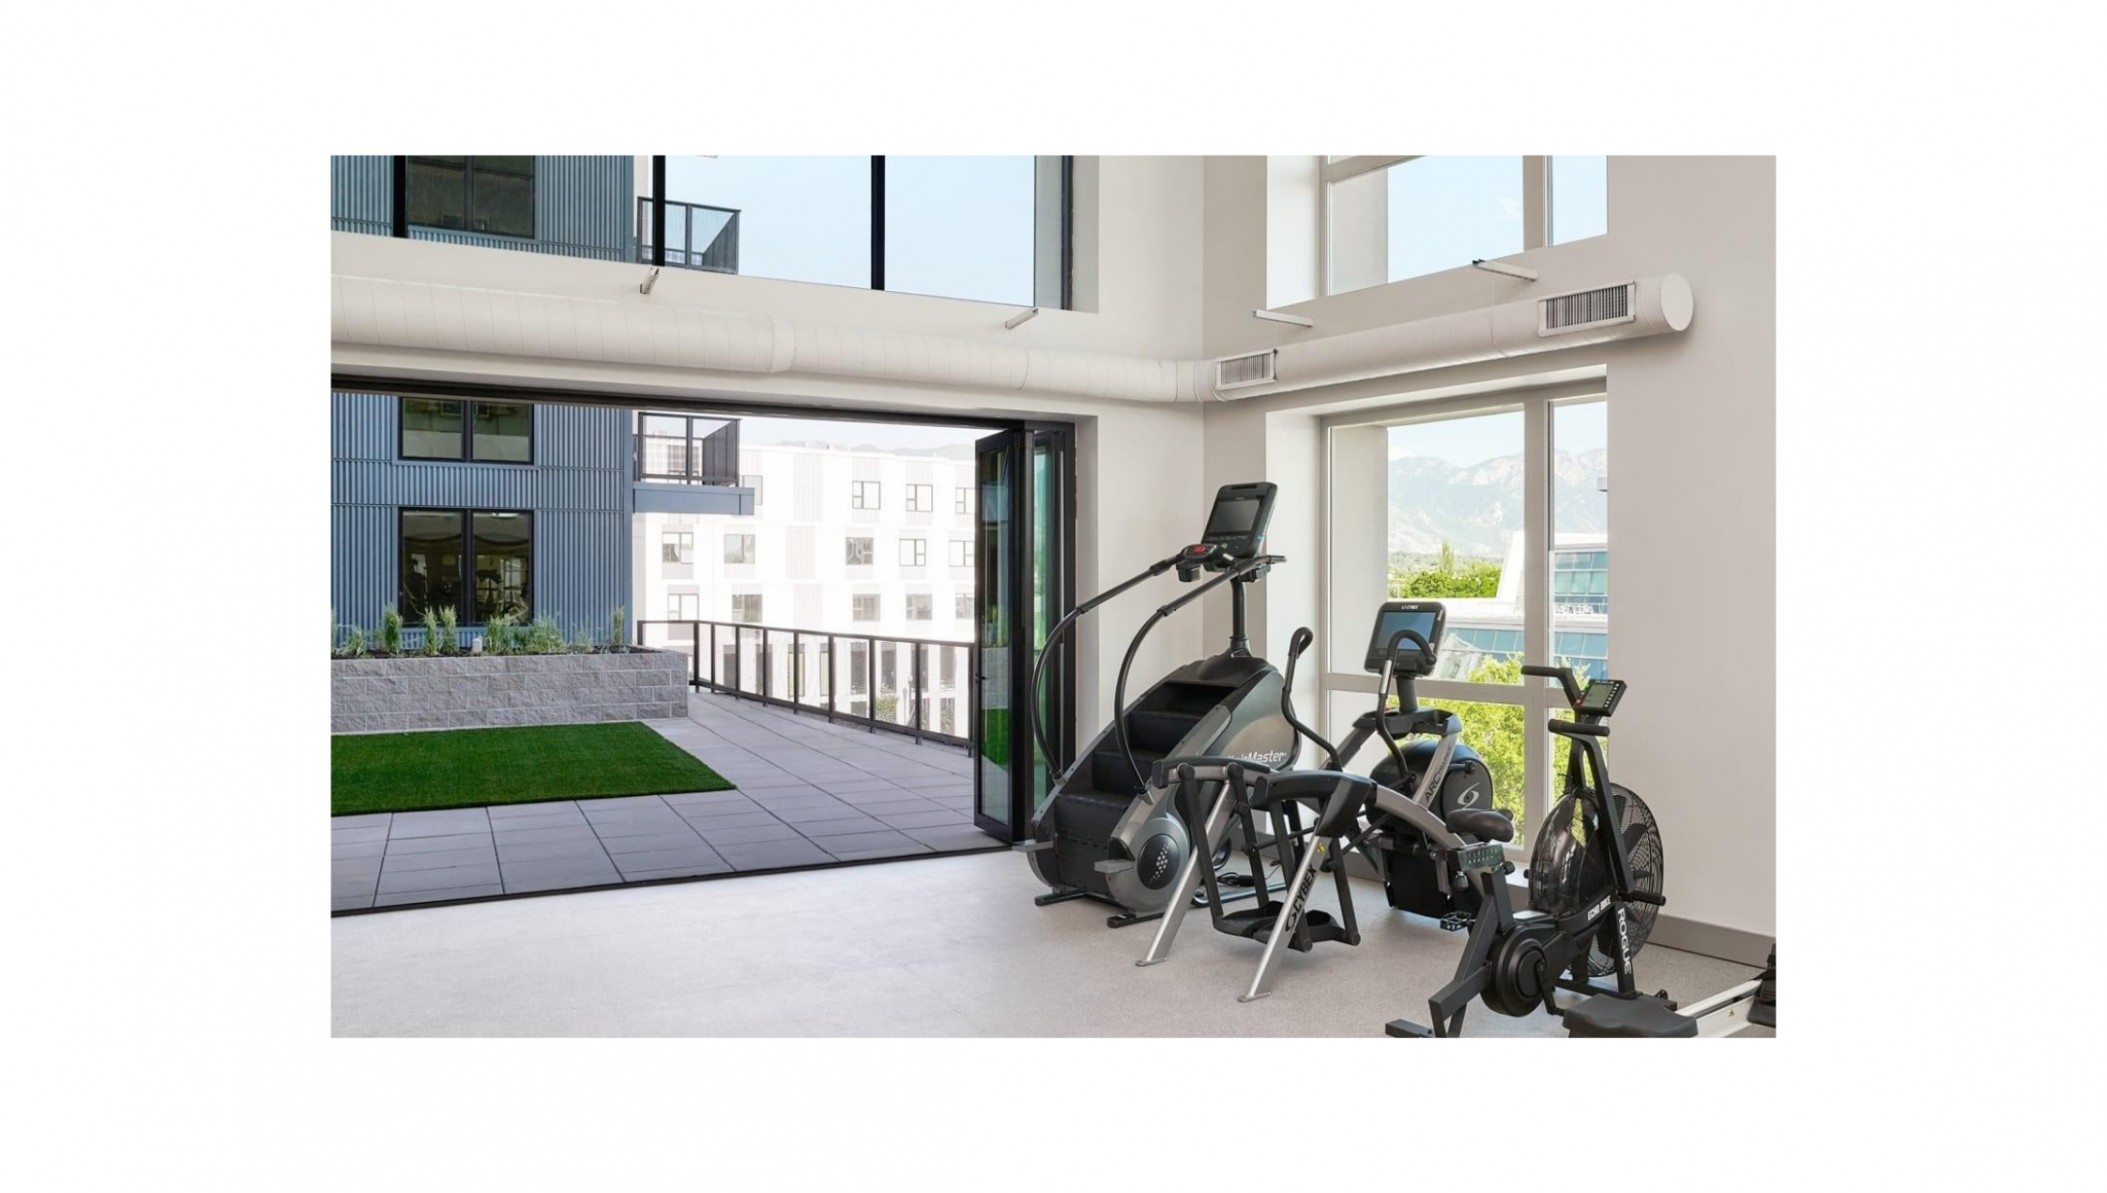 Avia Apartments cardio, True Fitness Palisade Step mill, Cybex 525 AT Total Body Arc Trainer.